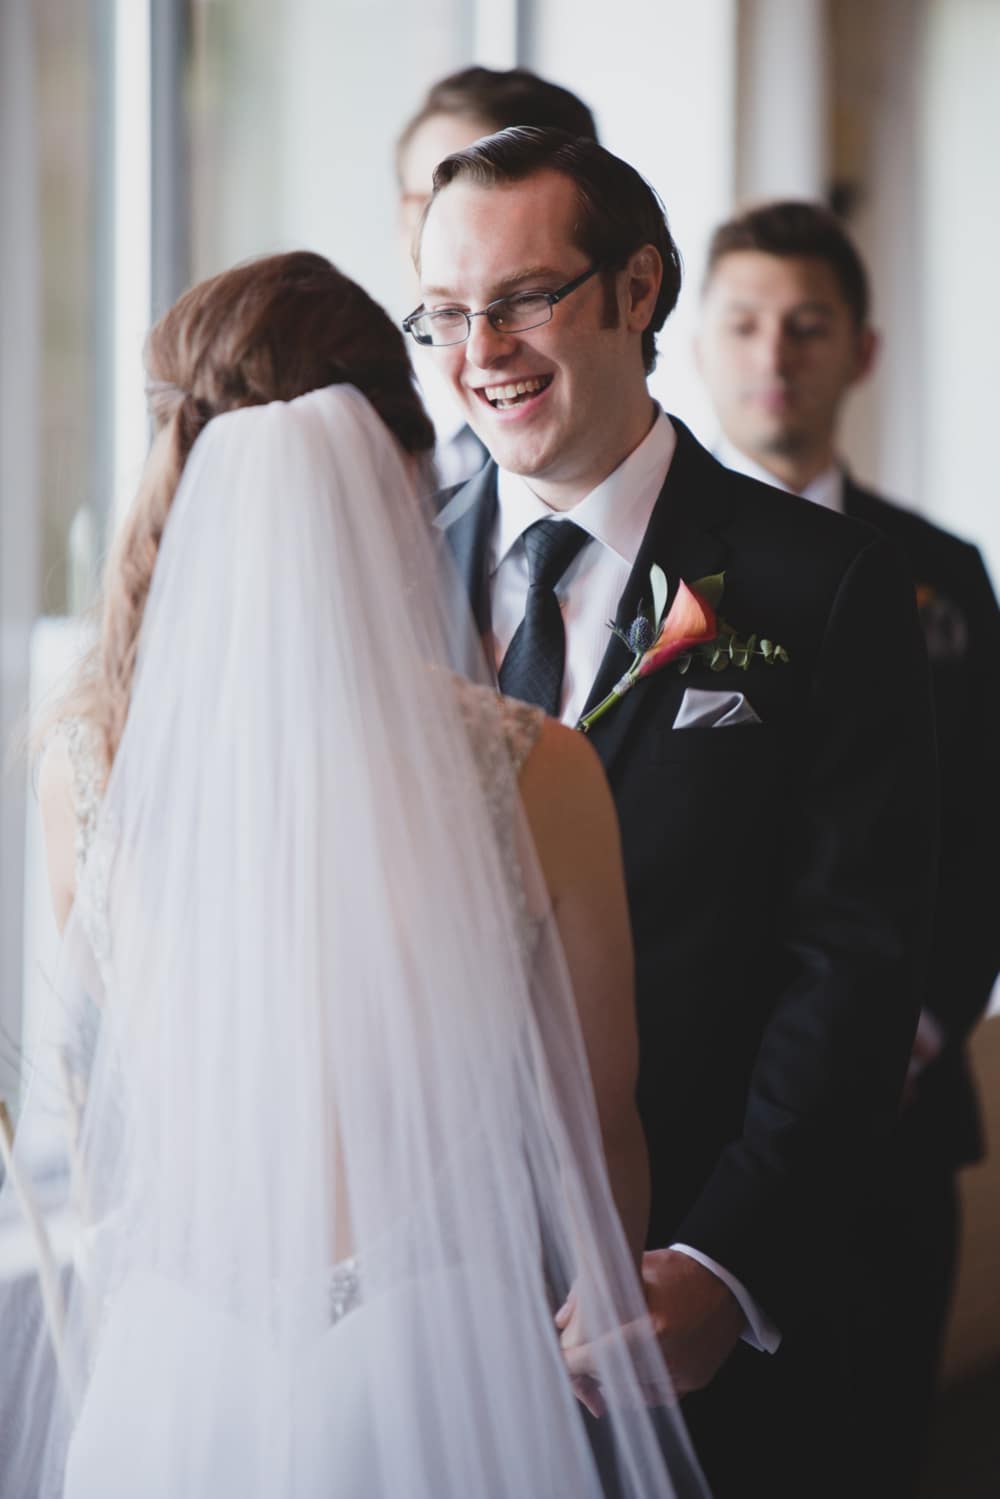 A documentary photograph of groom smiling at his bride during their intimate wedding ceremony at the Oceanview of Nahant in Massachusetts